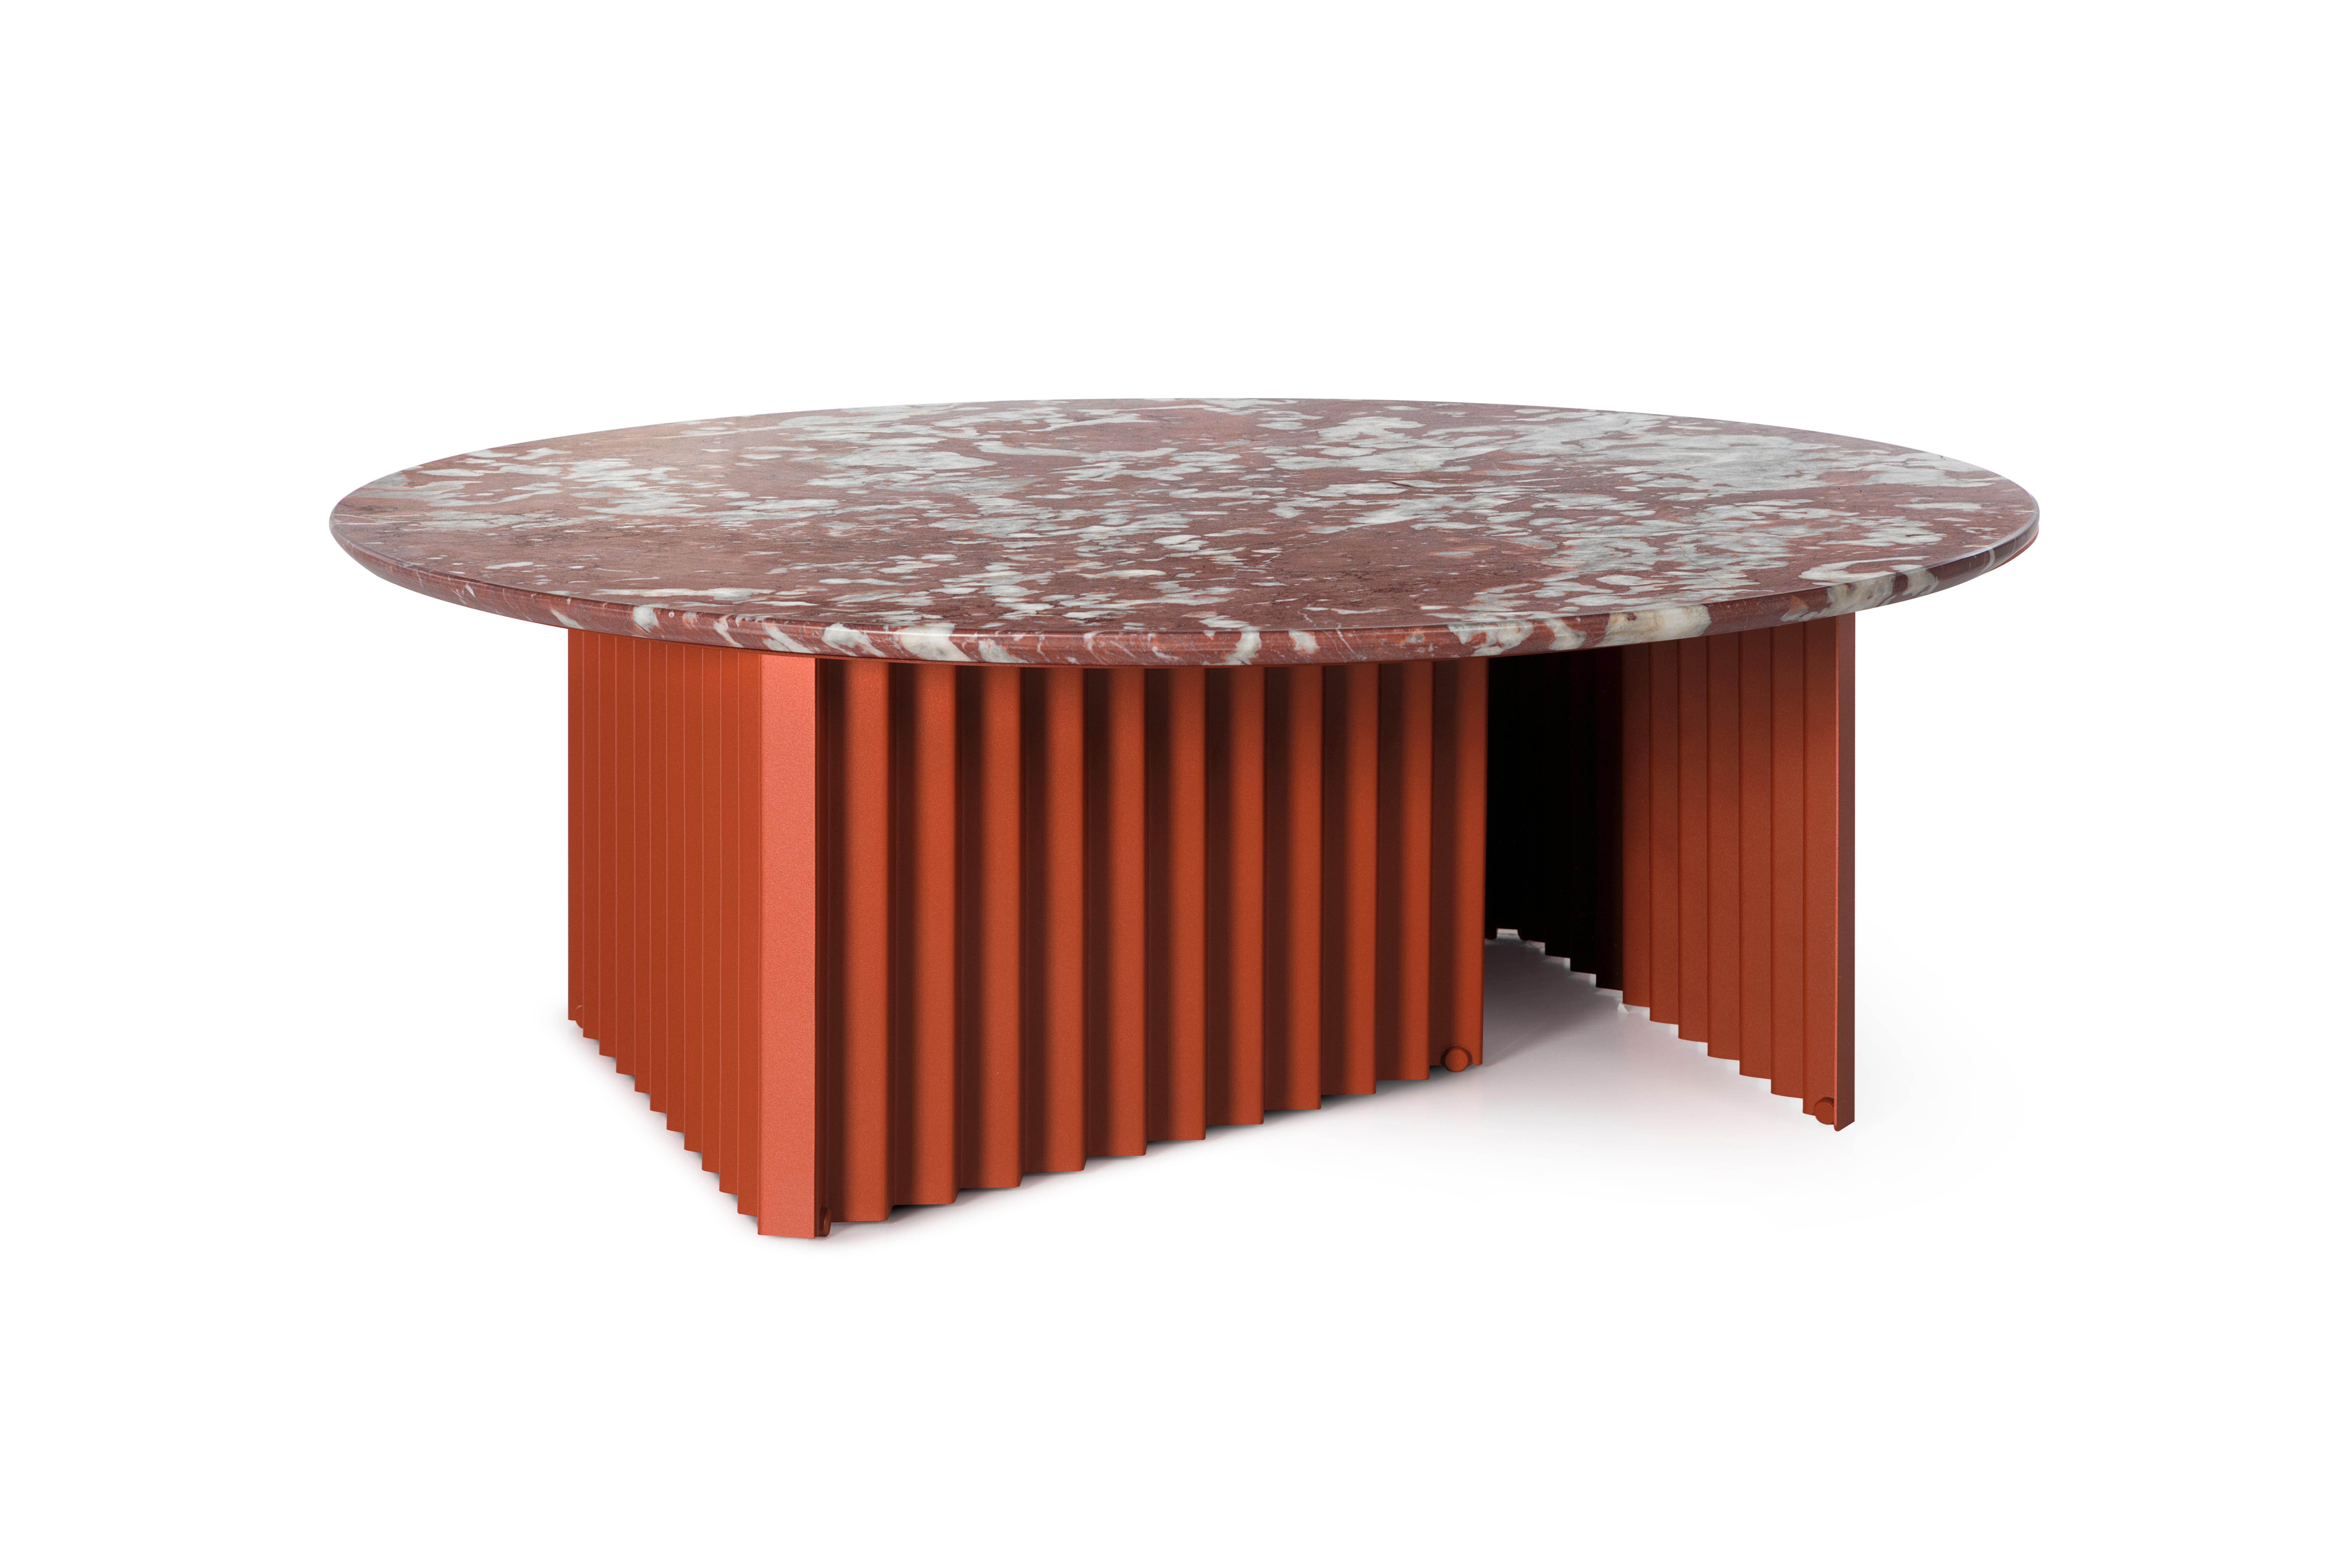 RS Barcelona Plec Round Large Table in Red Marble by A.P.O.